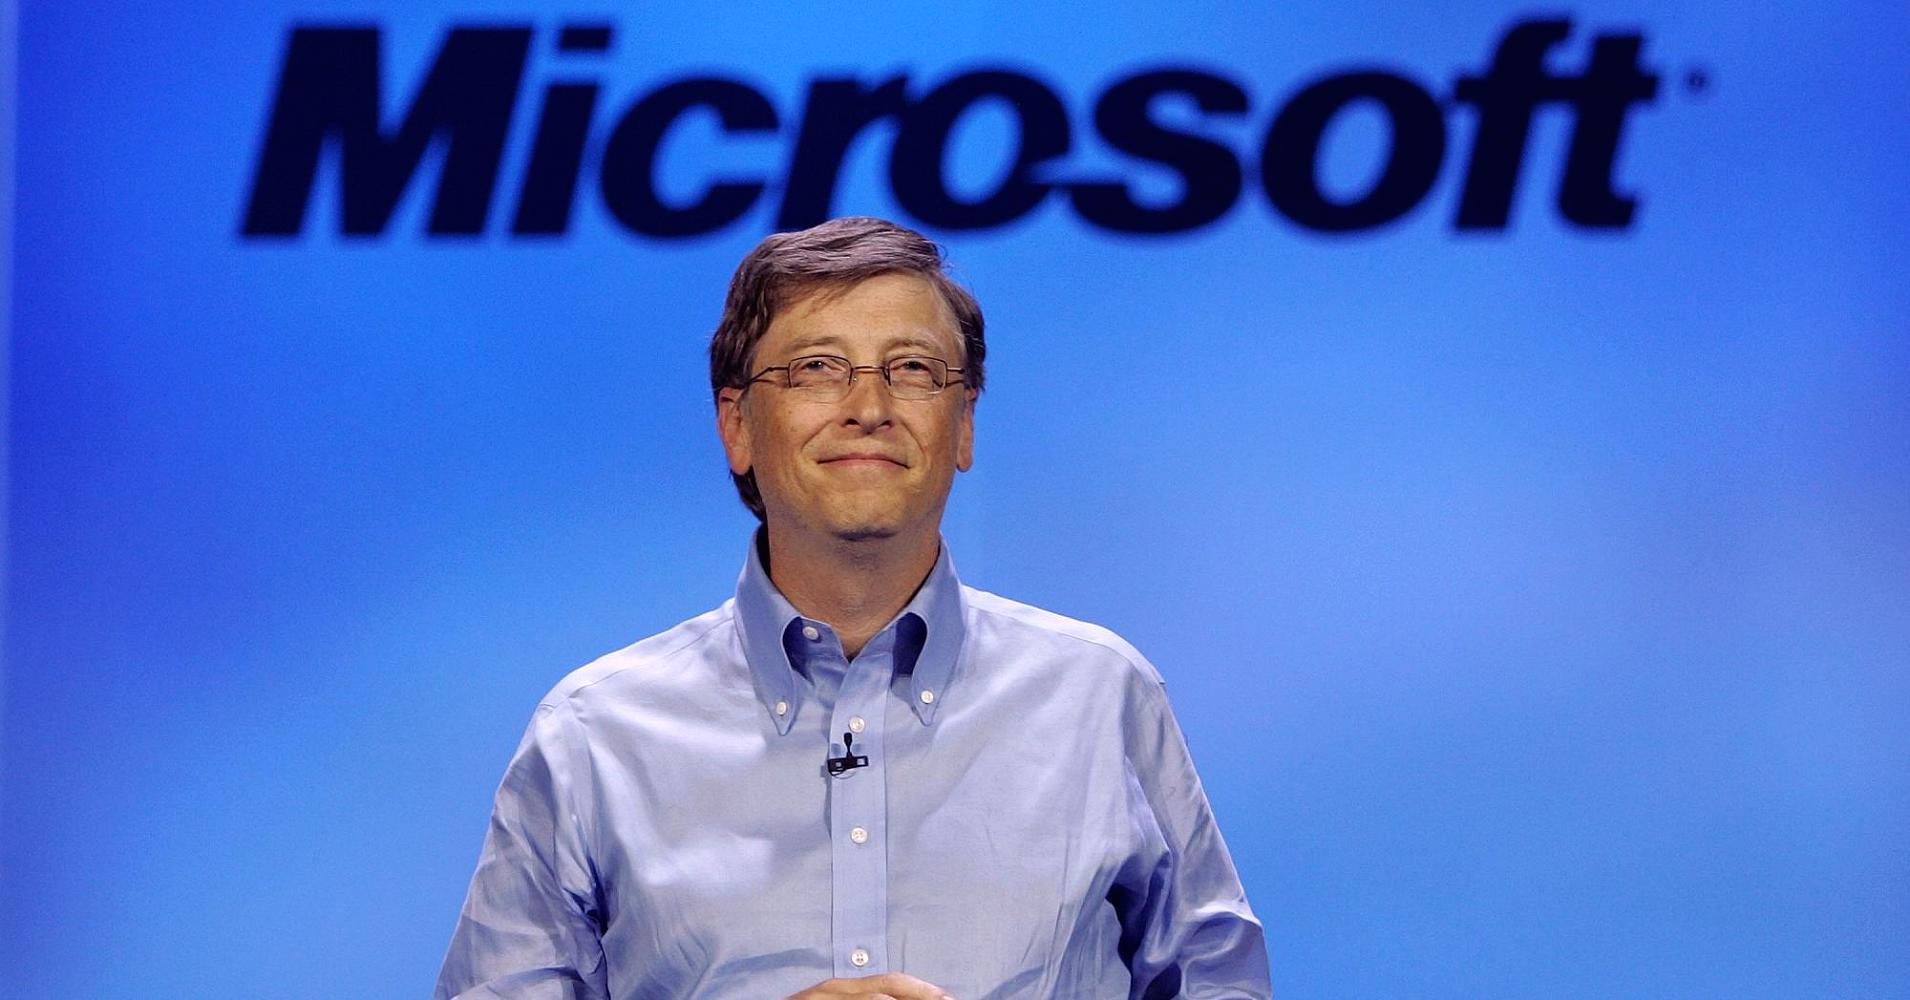 Bill Gates, founder of the Microsoft Corporation